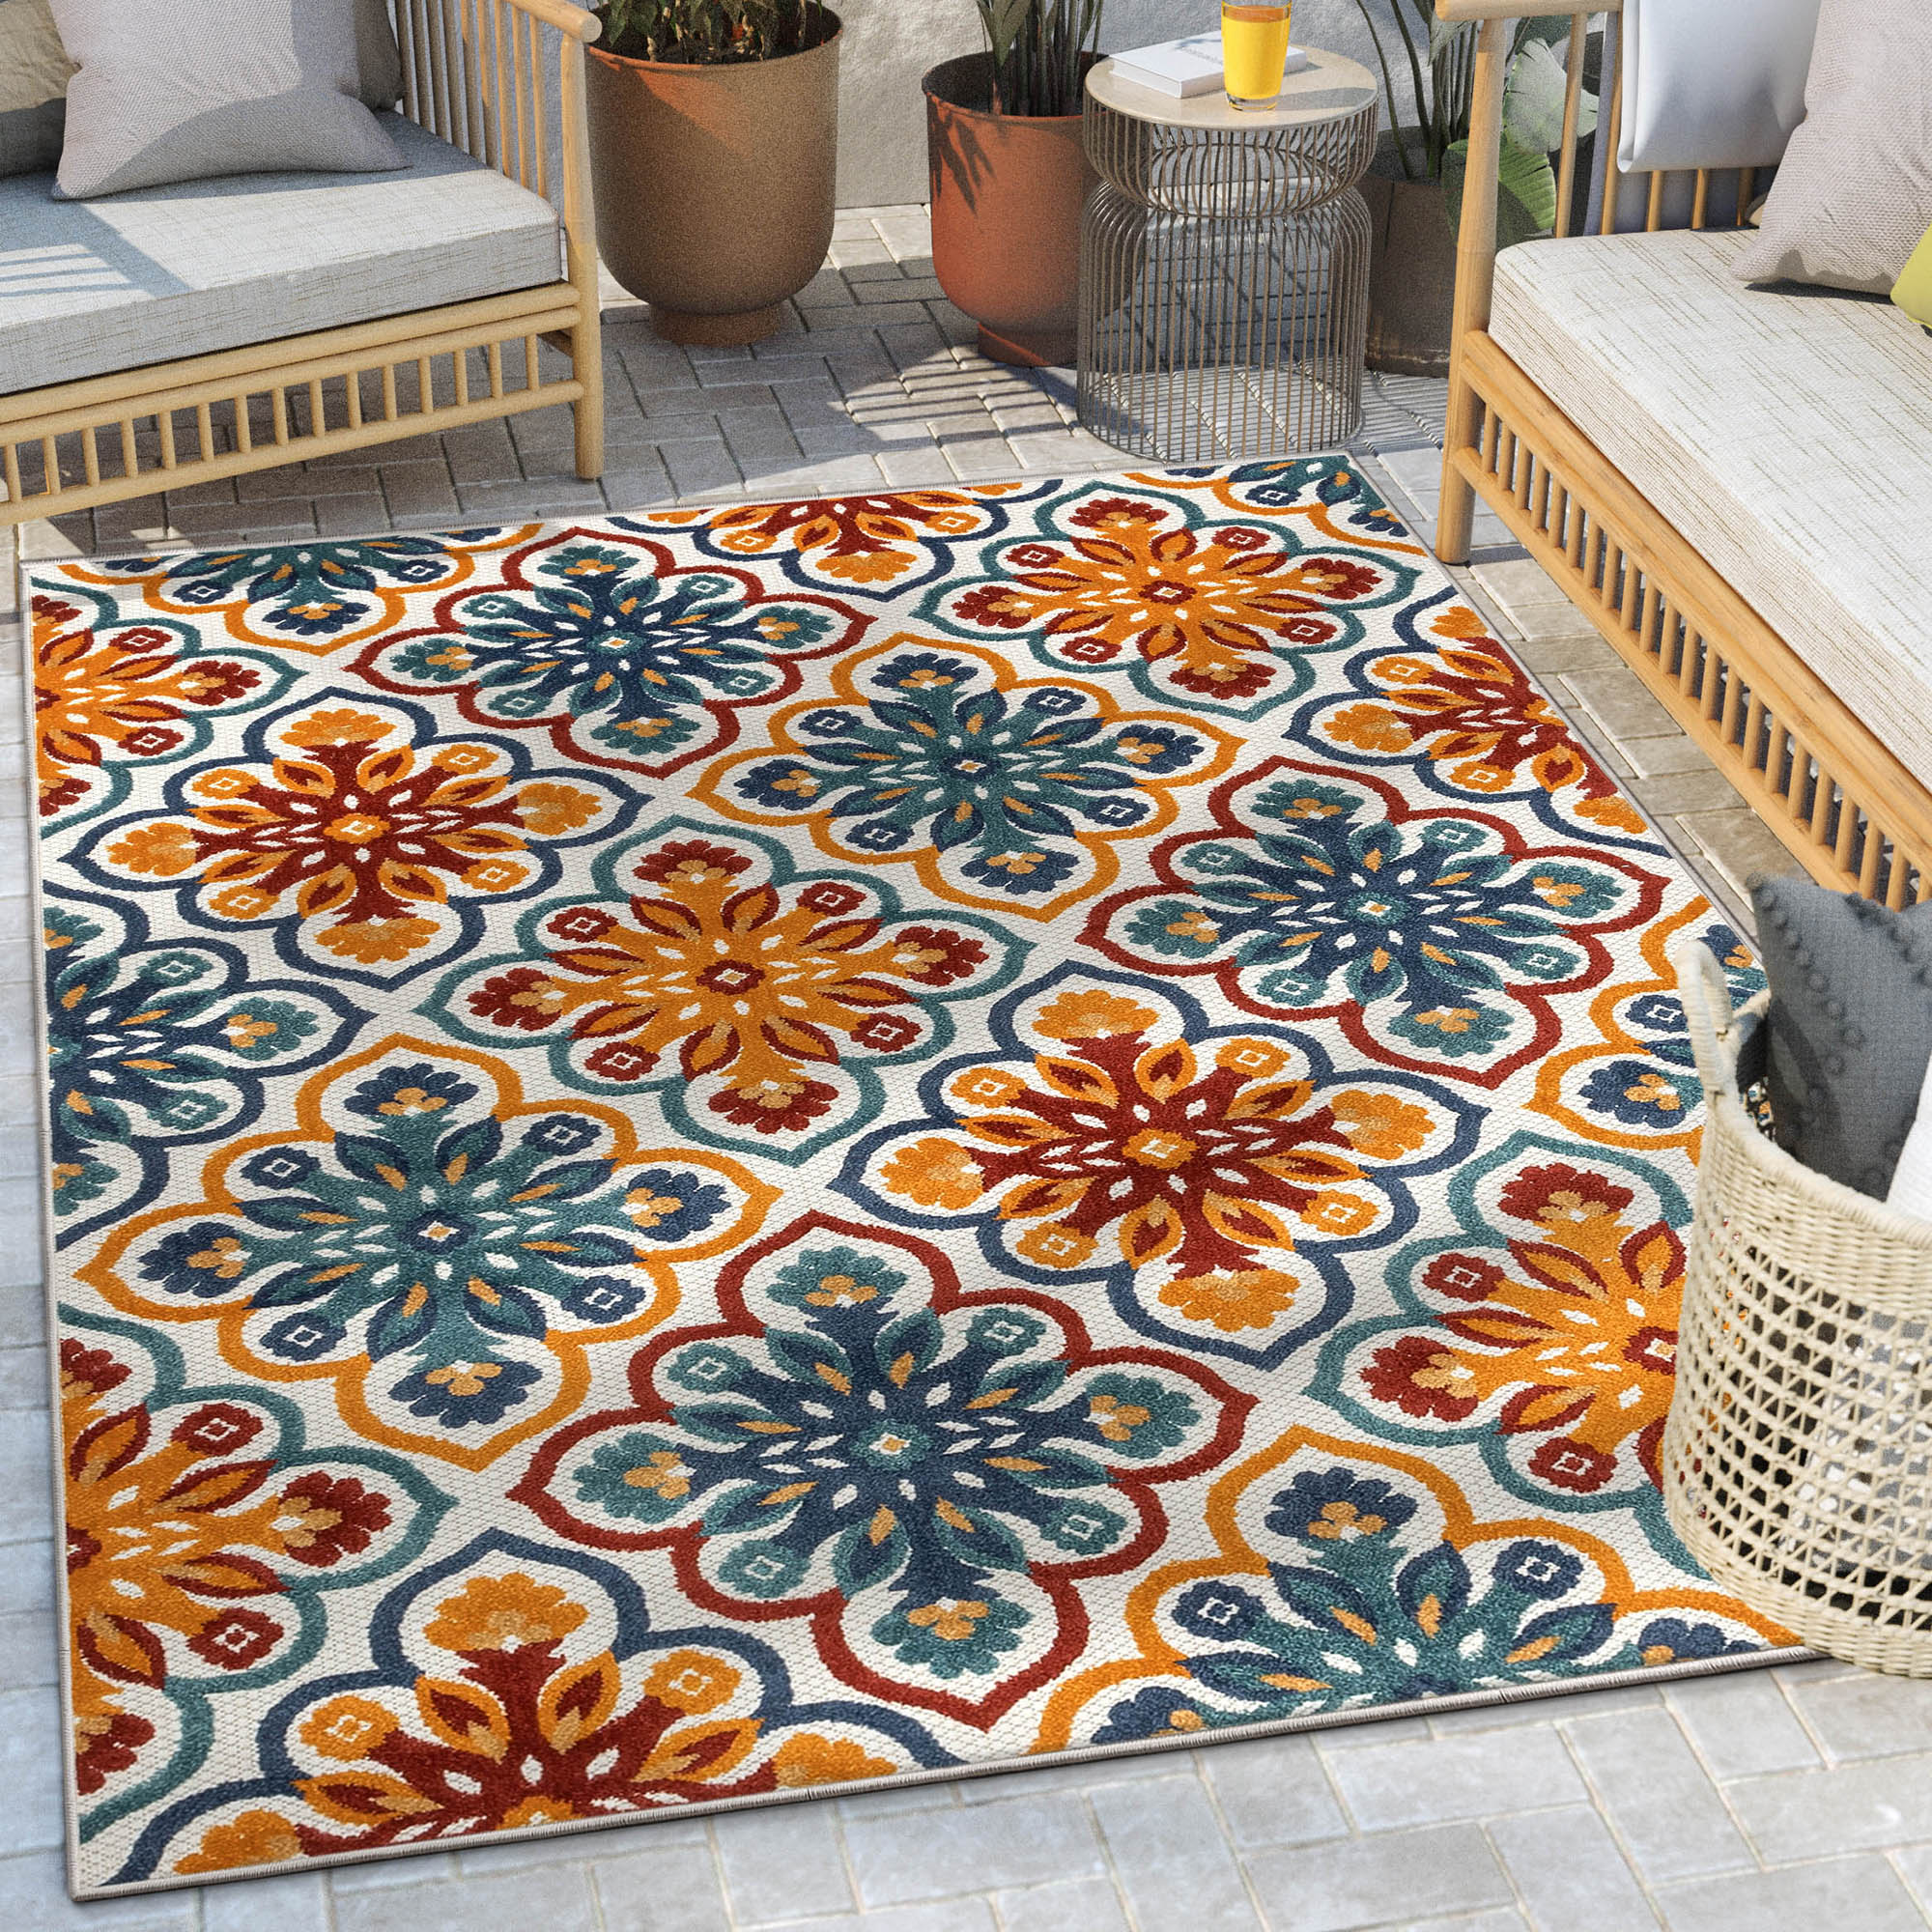 Rugs at Lowes.com